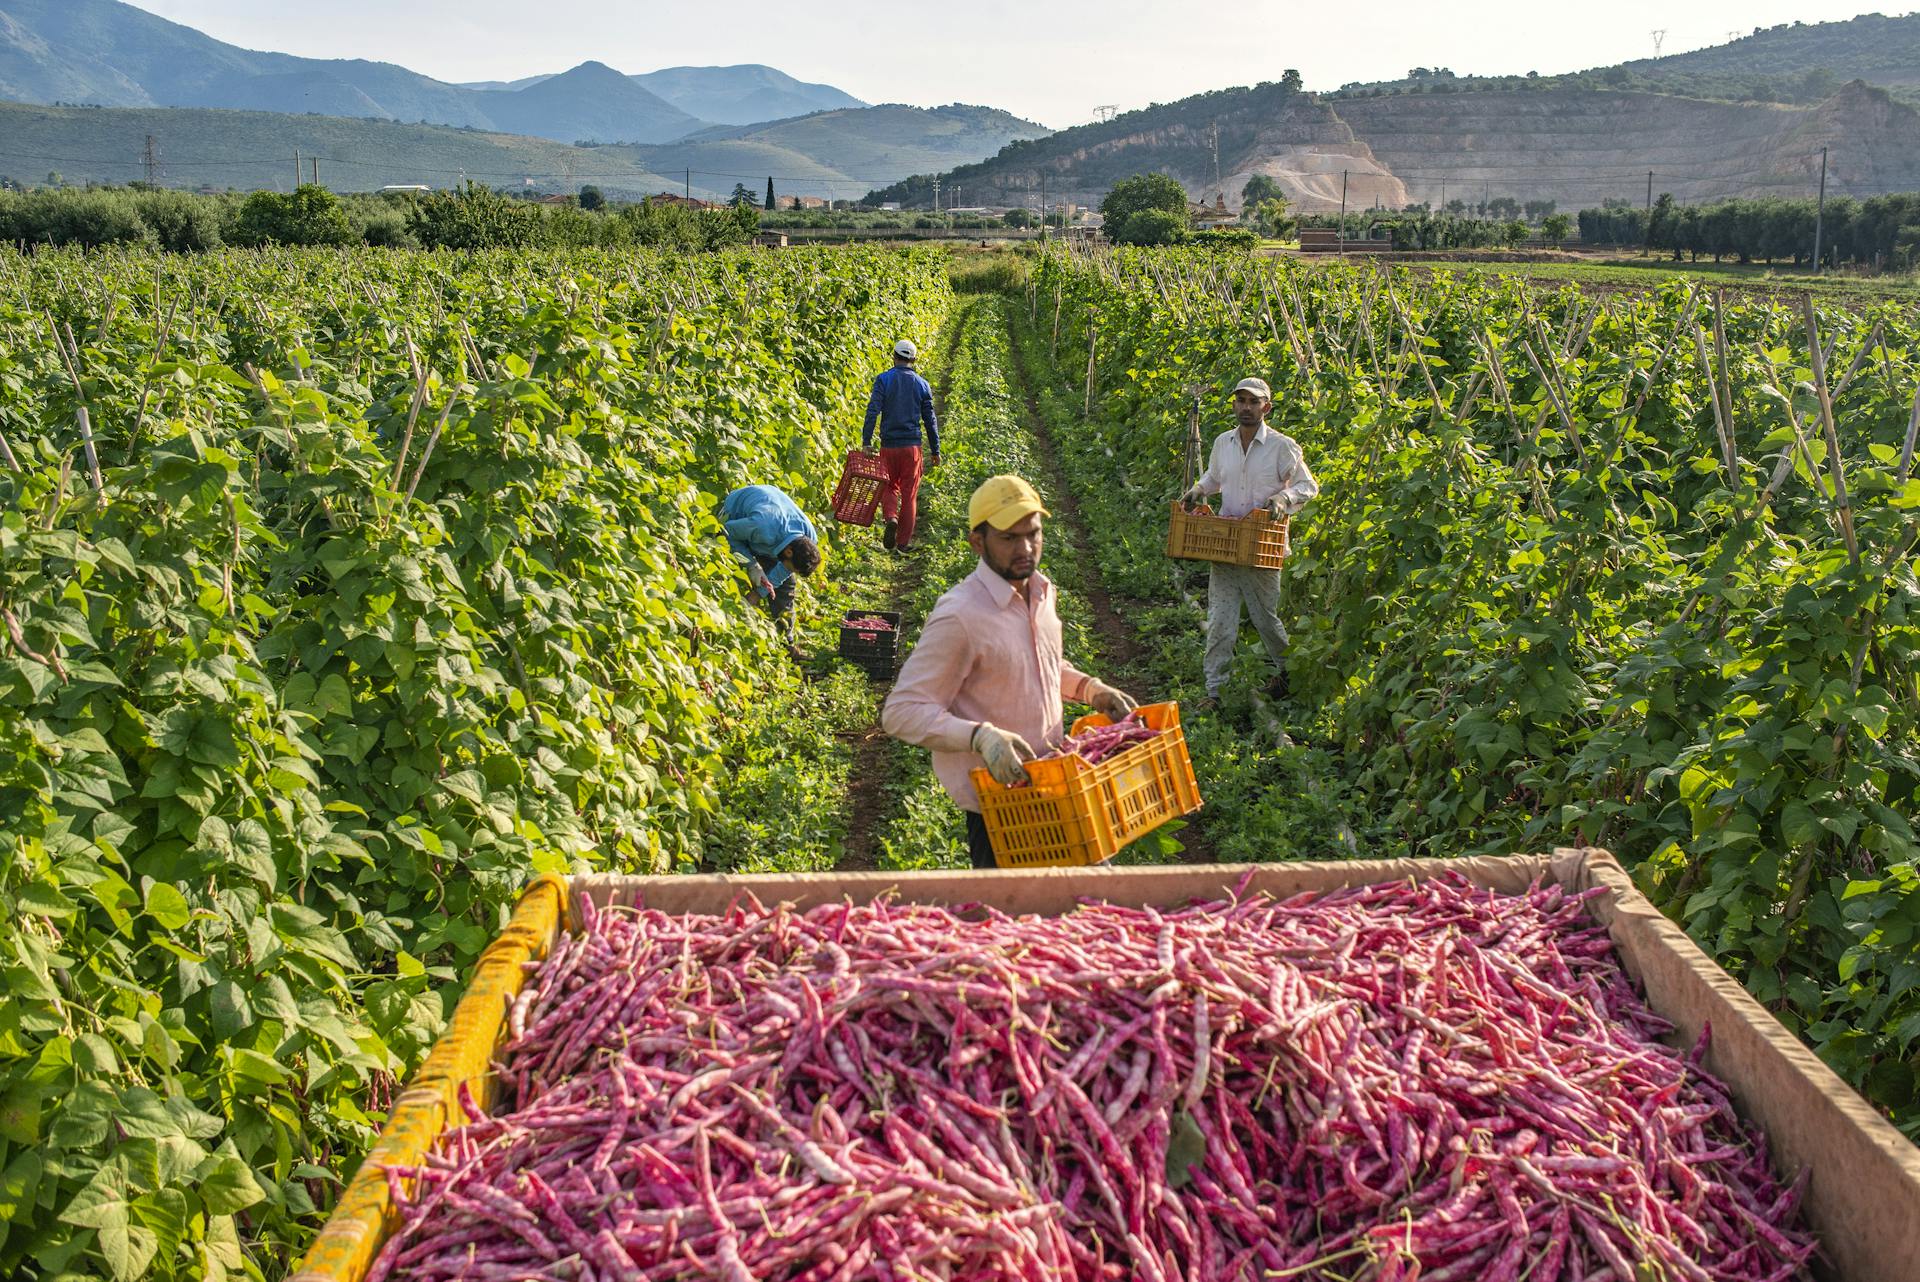 Punjabi workers harvesting cranberry beans in the Pontine Plain of Latina province. Credit: Marco Valle.